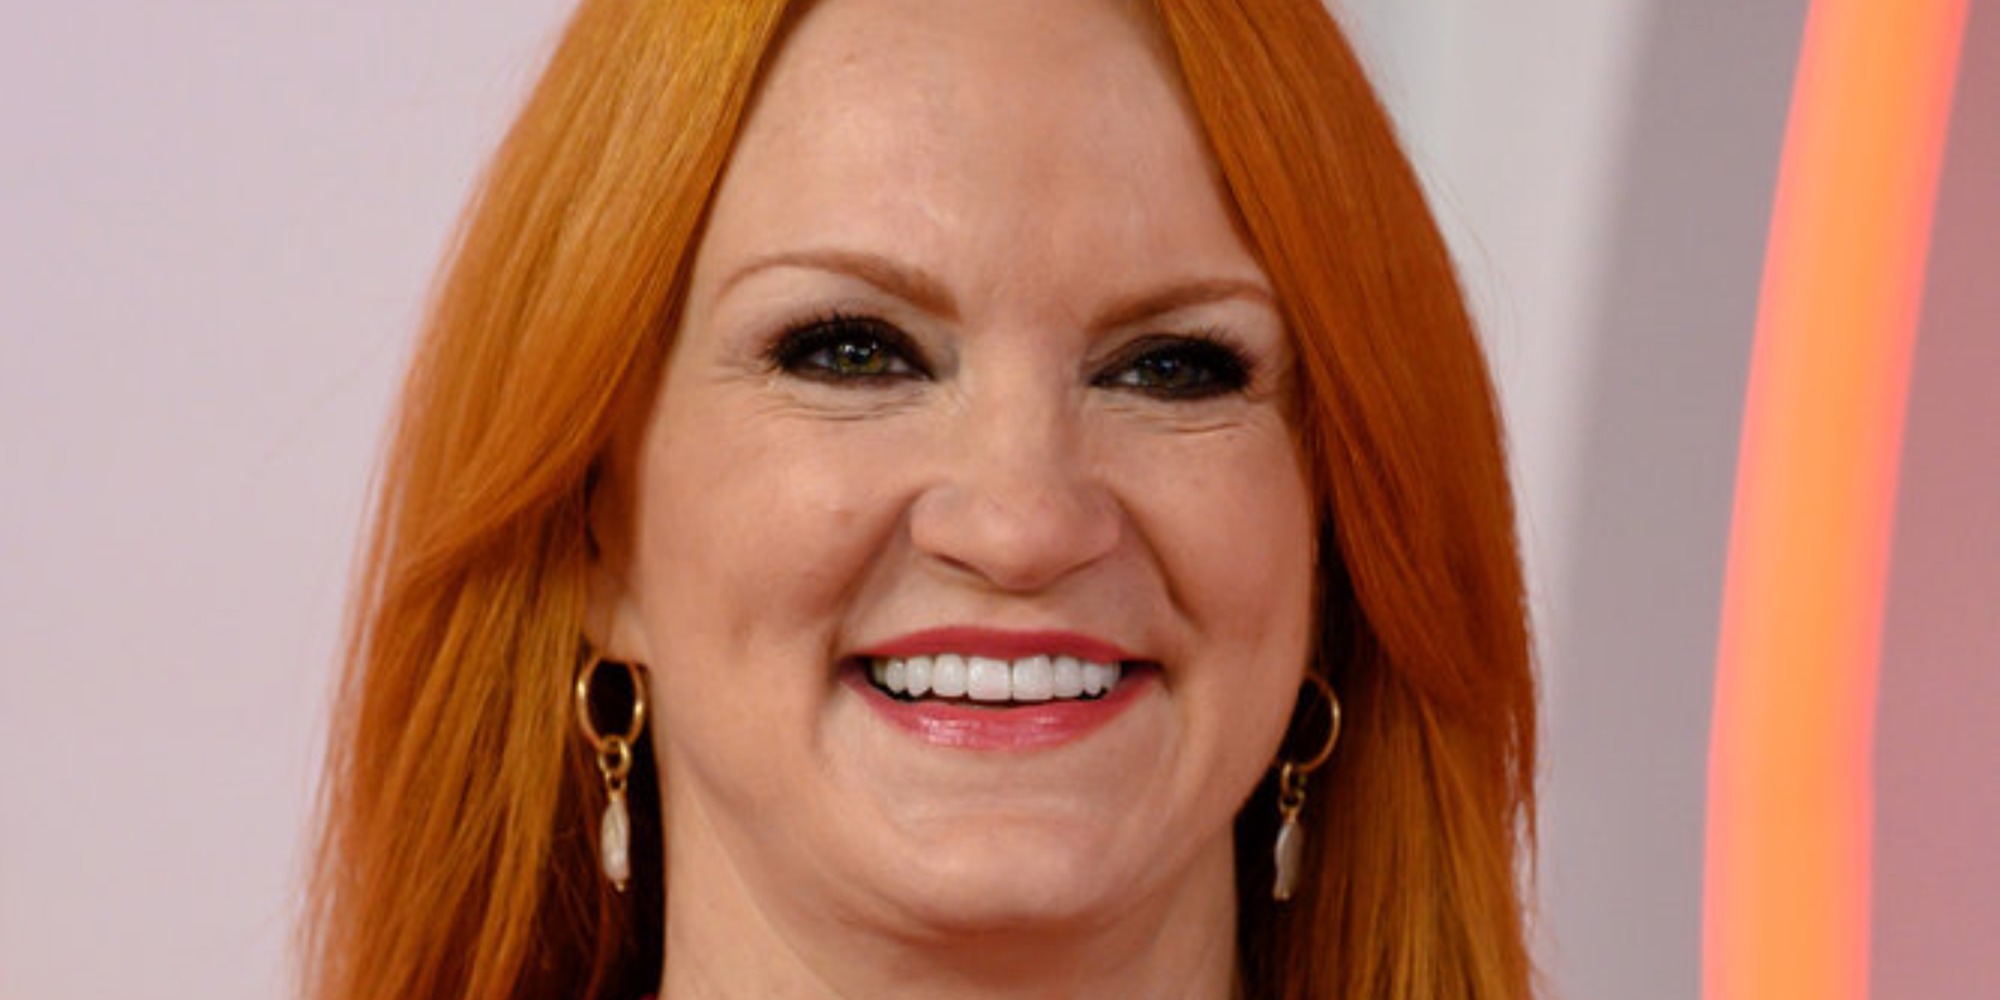 'The Pioneer Woman' star Ree Drummond smiles during a 'Today' Show appearance.